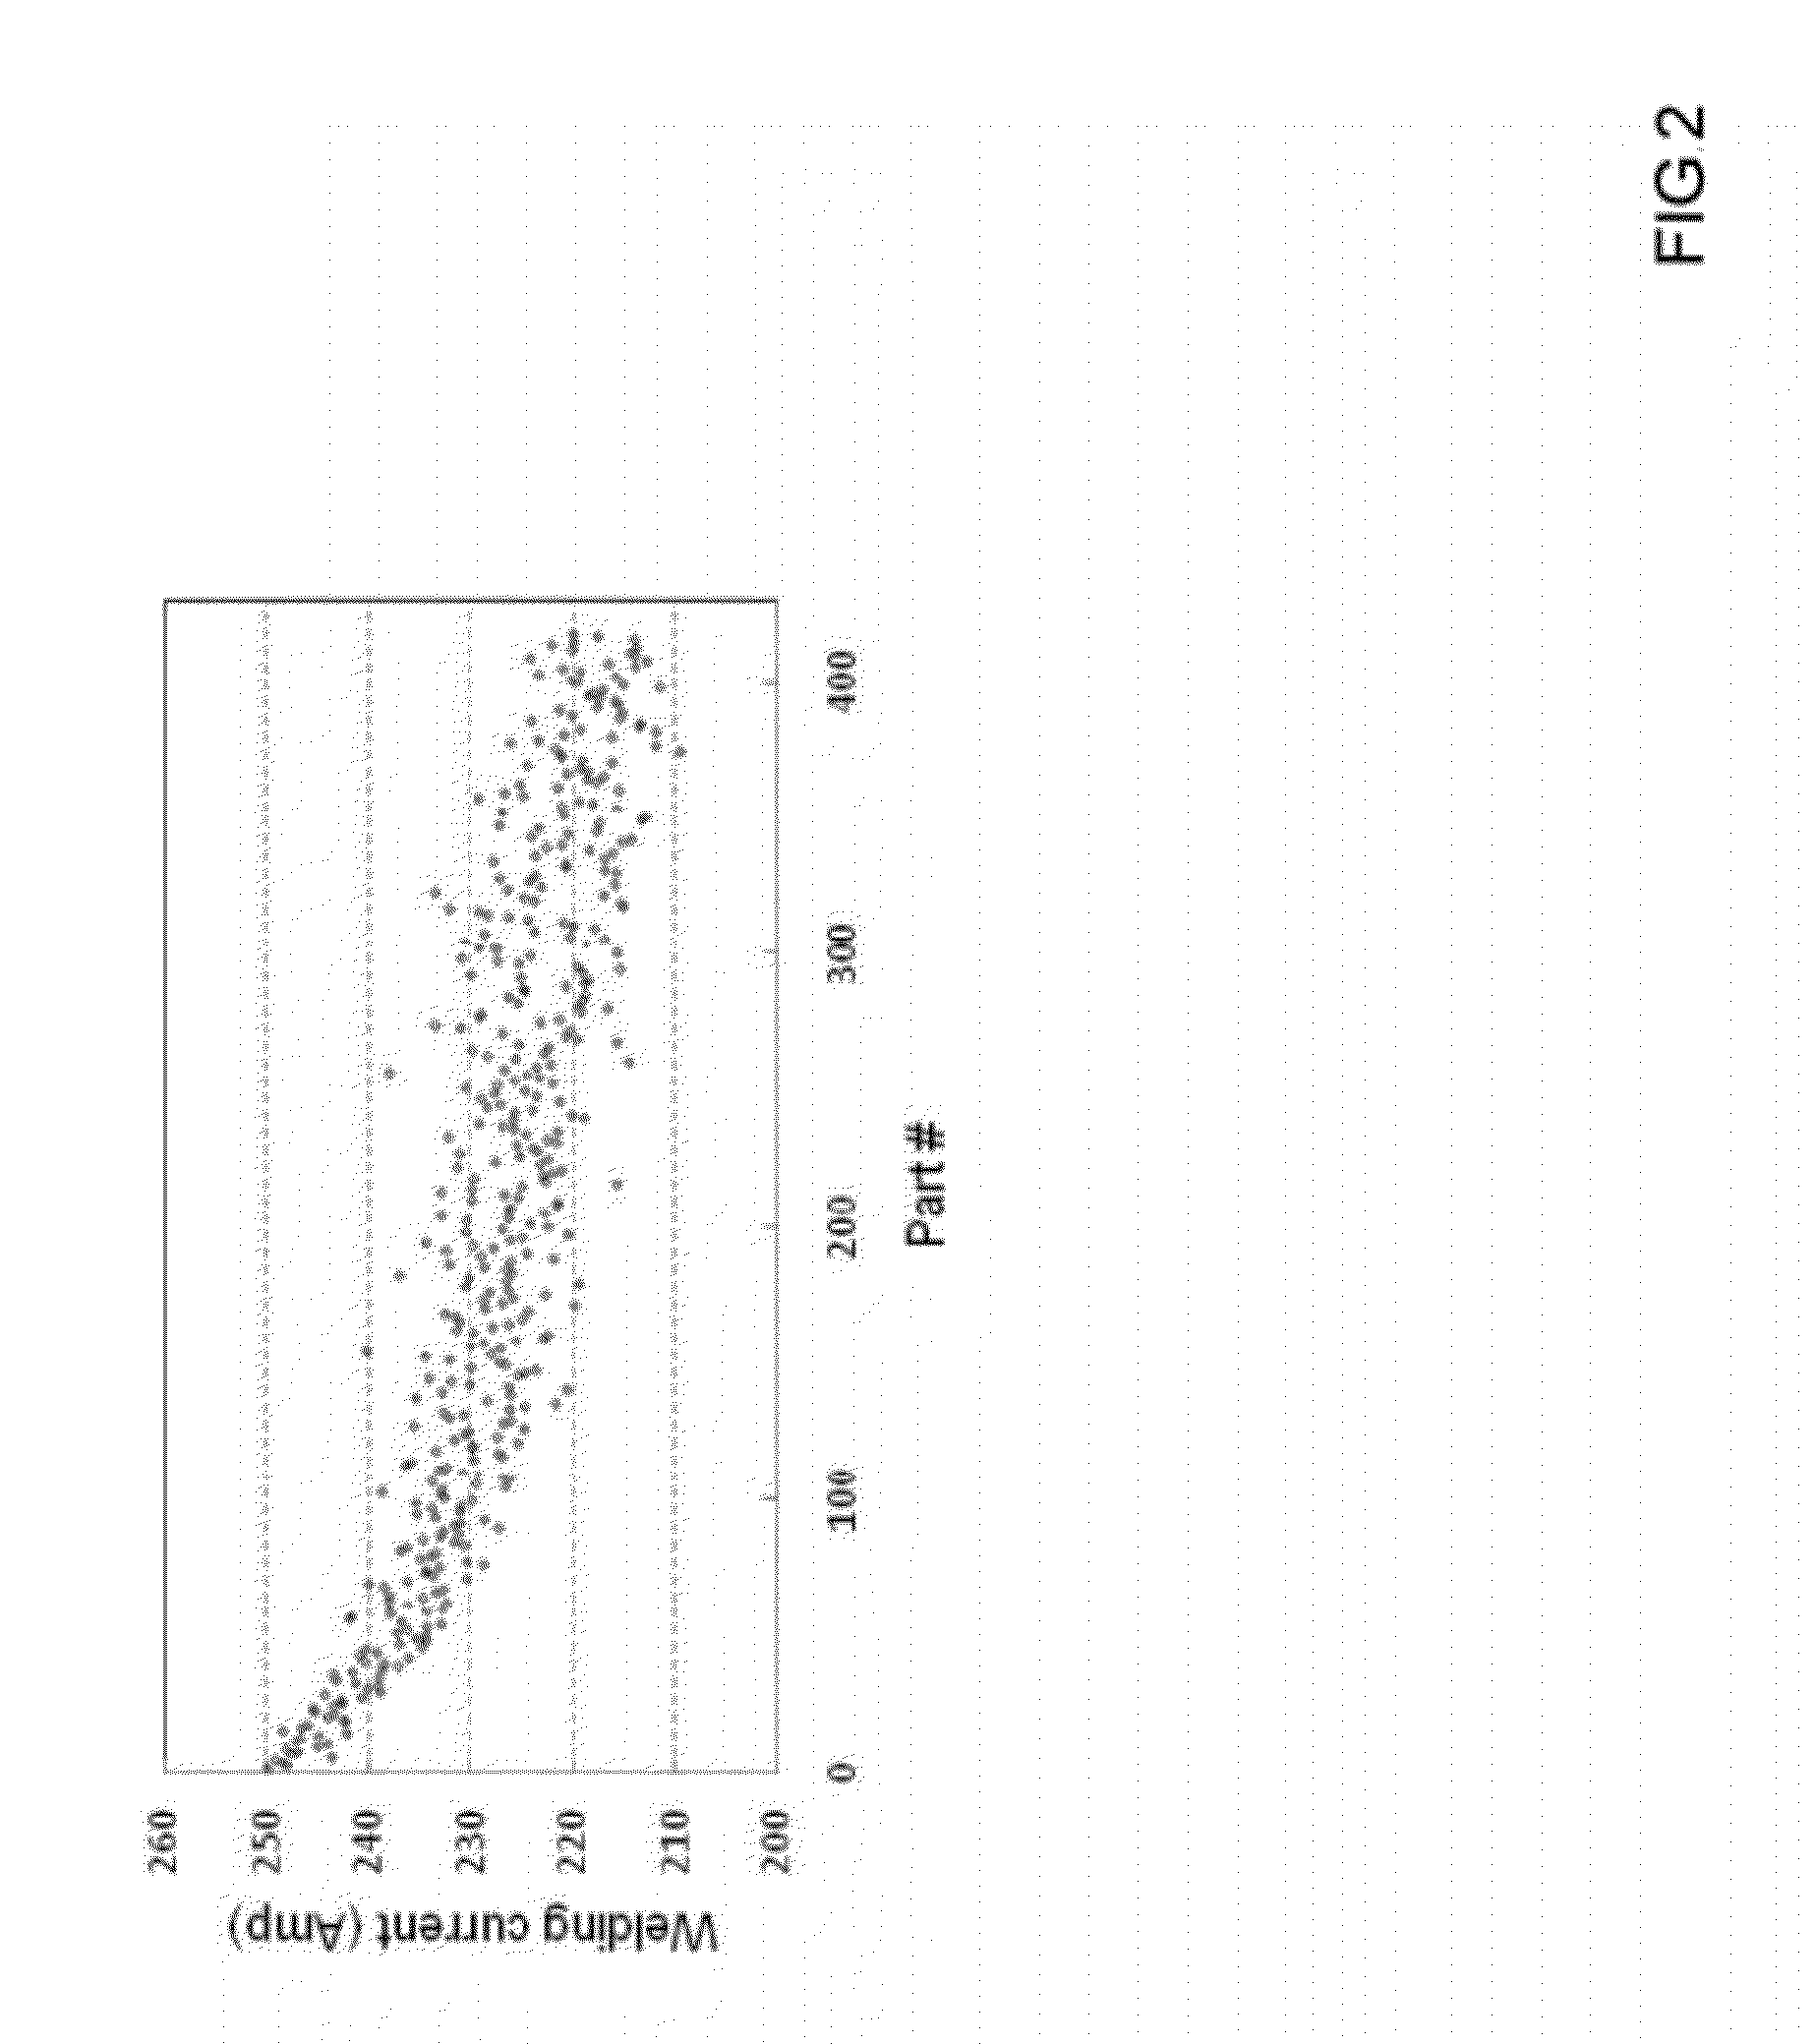 Method for providing real-time monitoring of contact tip performance